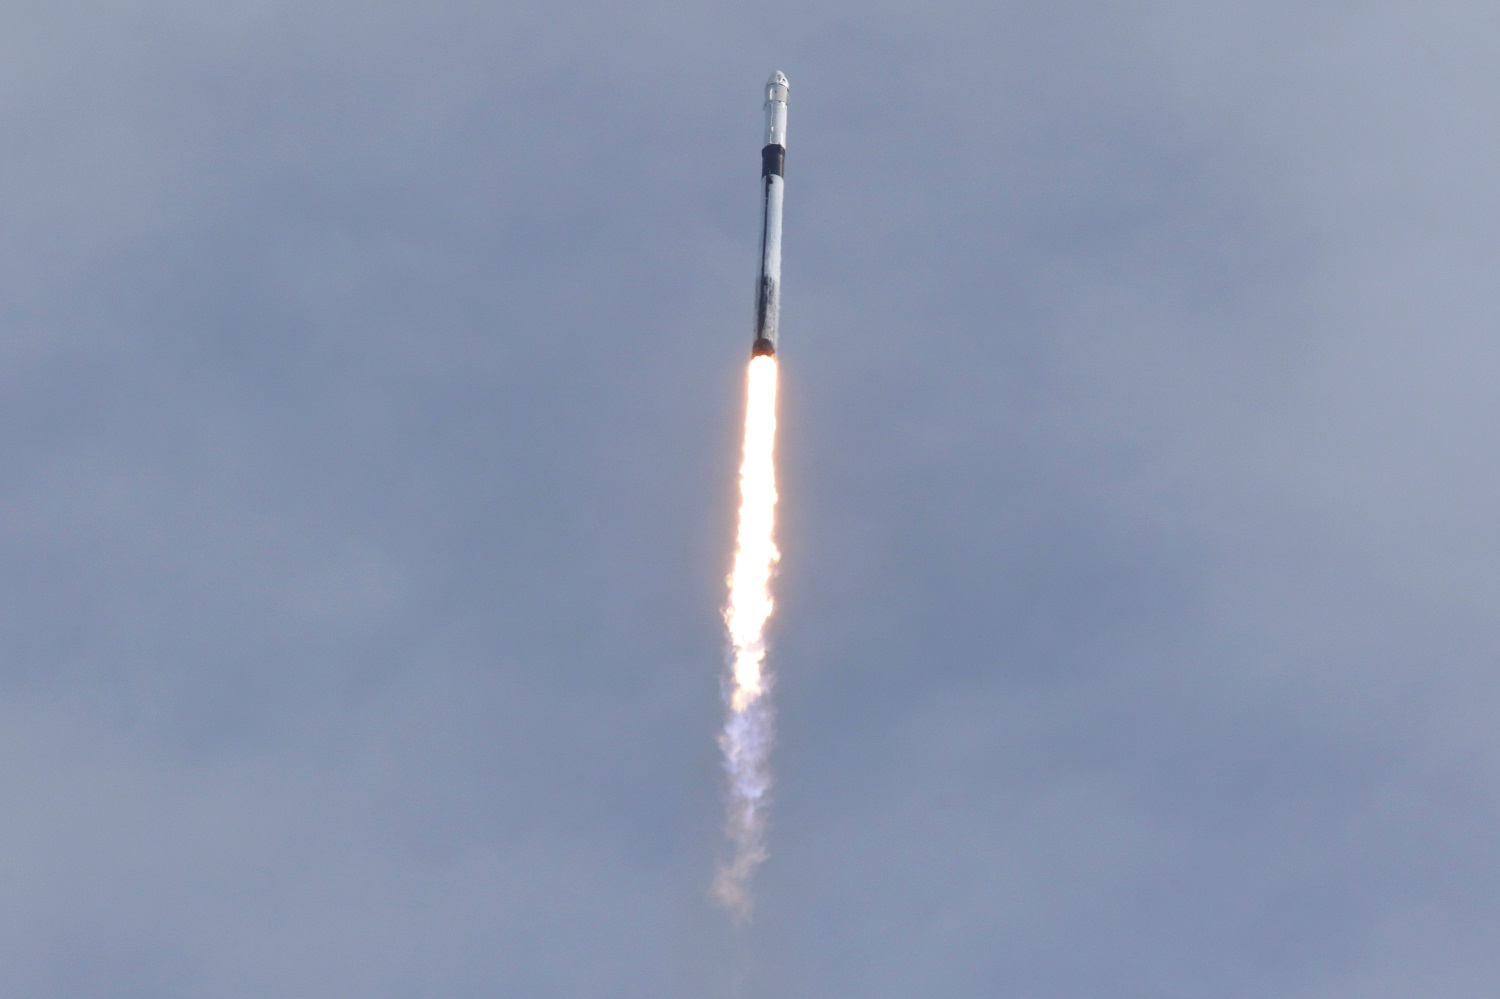 A SpaceX Falcon 9 rocket, carrying the Crew Dragon astronaut capsule, lifts off on an in-flight abort test from the Kennedy Space Center in Cape Canaveral